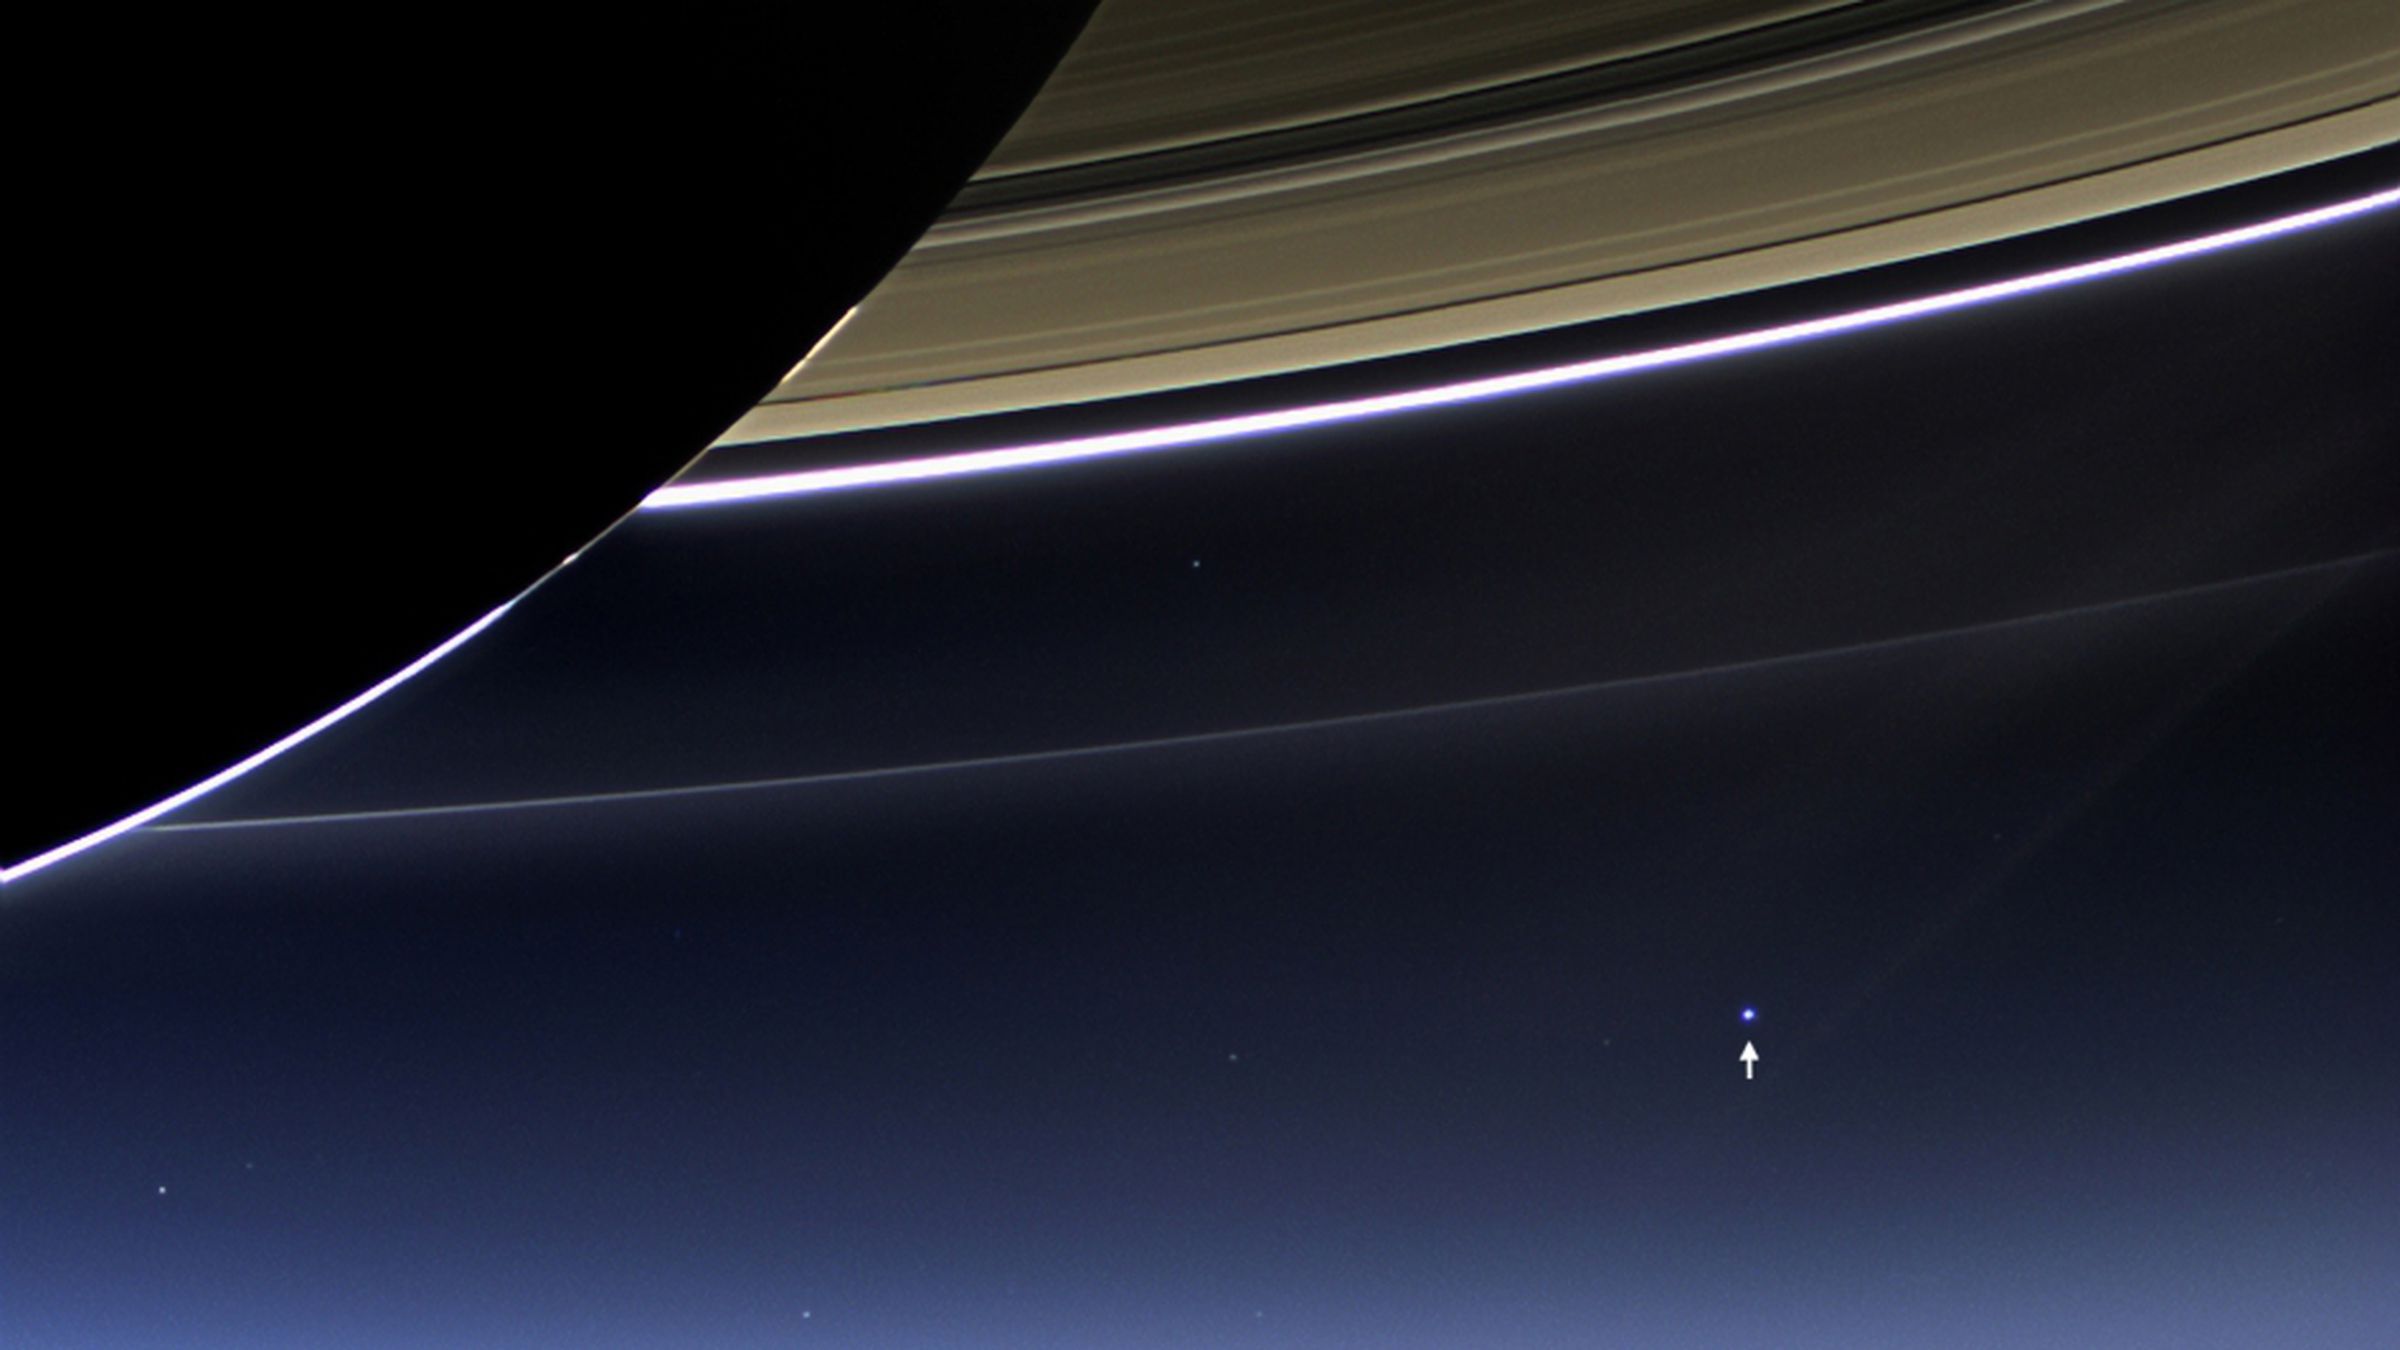 Earth seen from space by NASA's Cassini and MESSENGER spacecraft